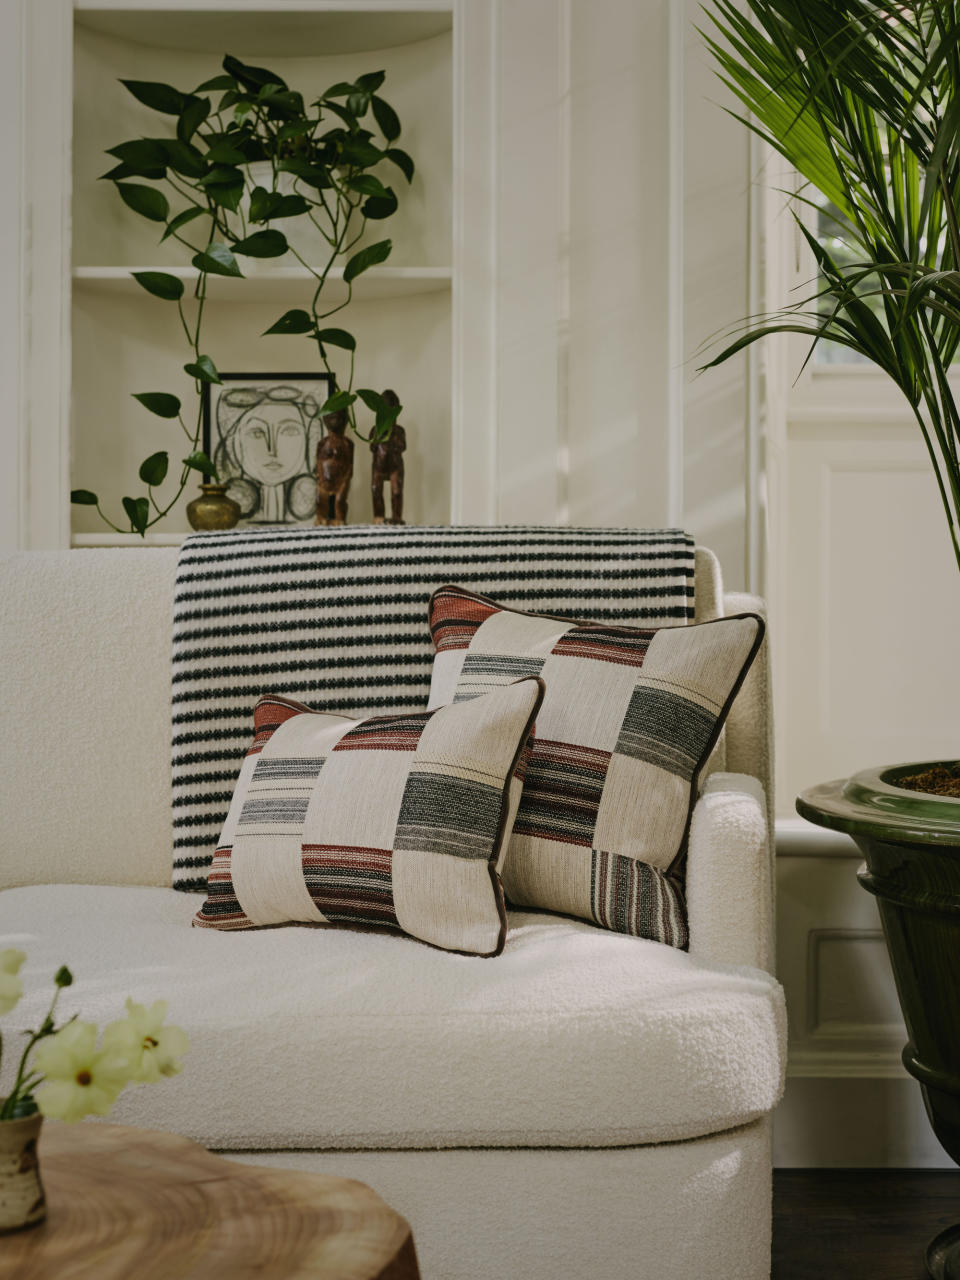 A living room with checkerboard print couch pillows